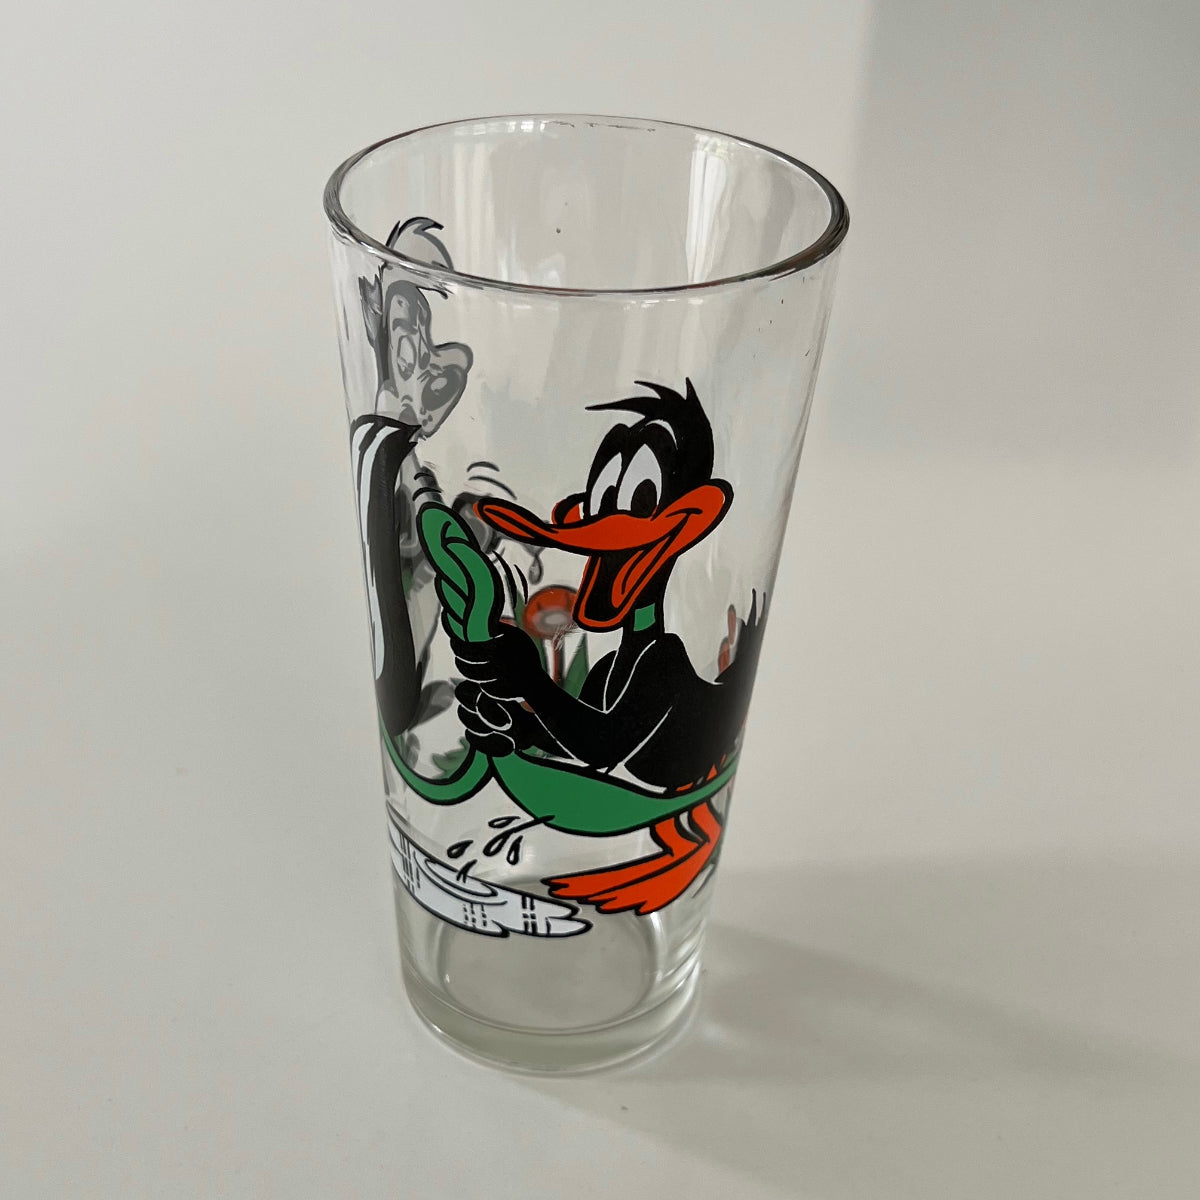 Vintage 1976 Pepe Le Pew and Daffy Duck Looney Tunes Drinking Glass